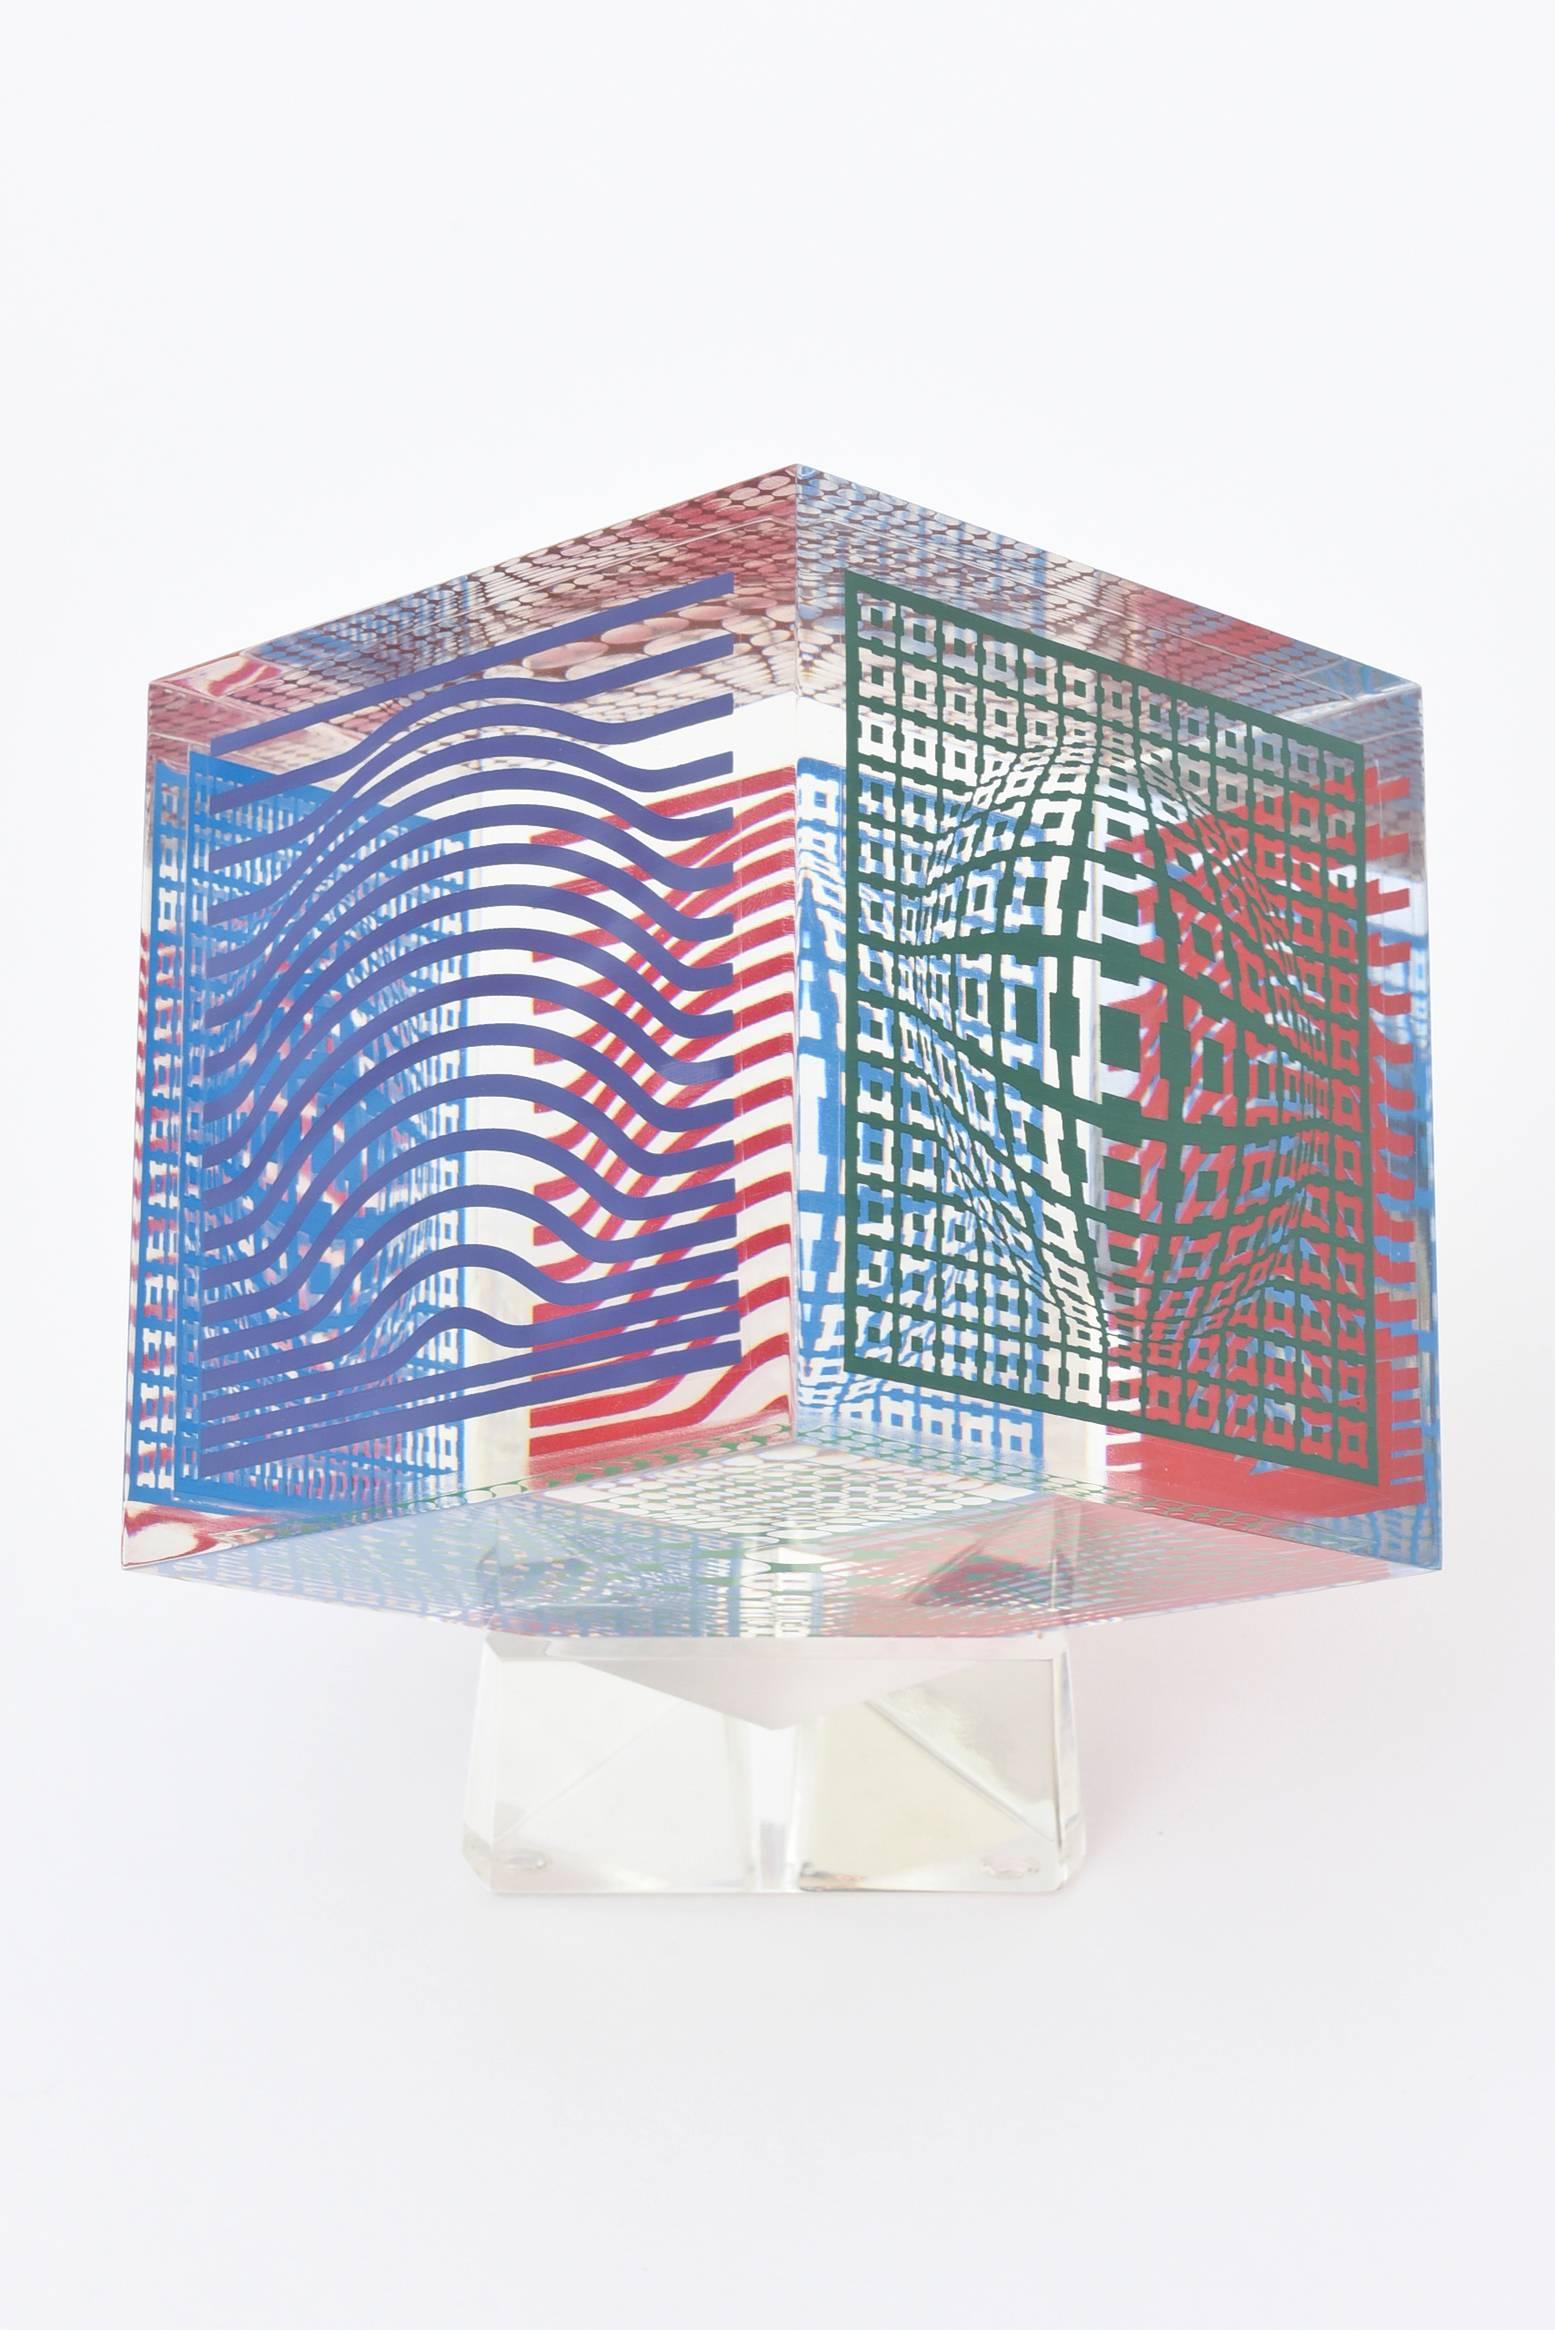 Victor Vasarely Acrylic and Silkscreen Graphic Cube Abstract Op Art Sculpture 1